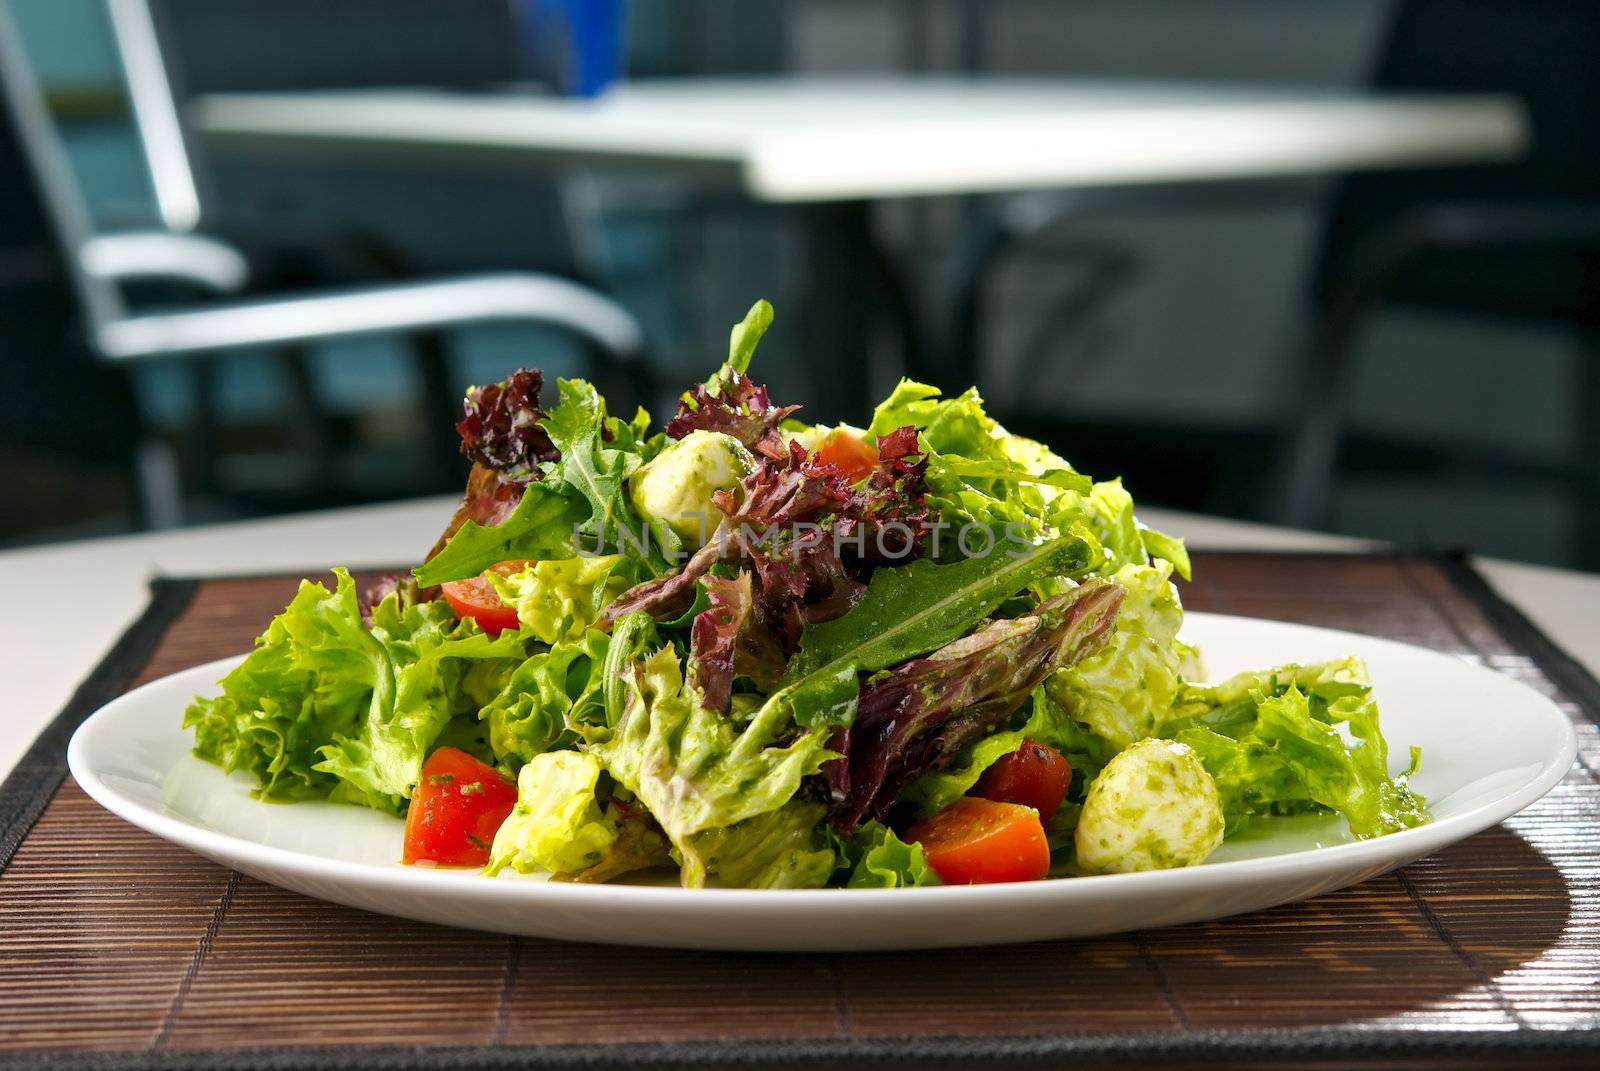 Fresh salad with mozzarella cheese and cherry tomatoes. Indoor. Blurry background of restaurant interior